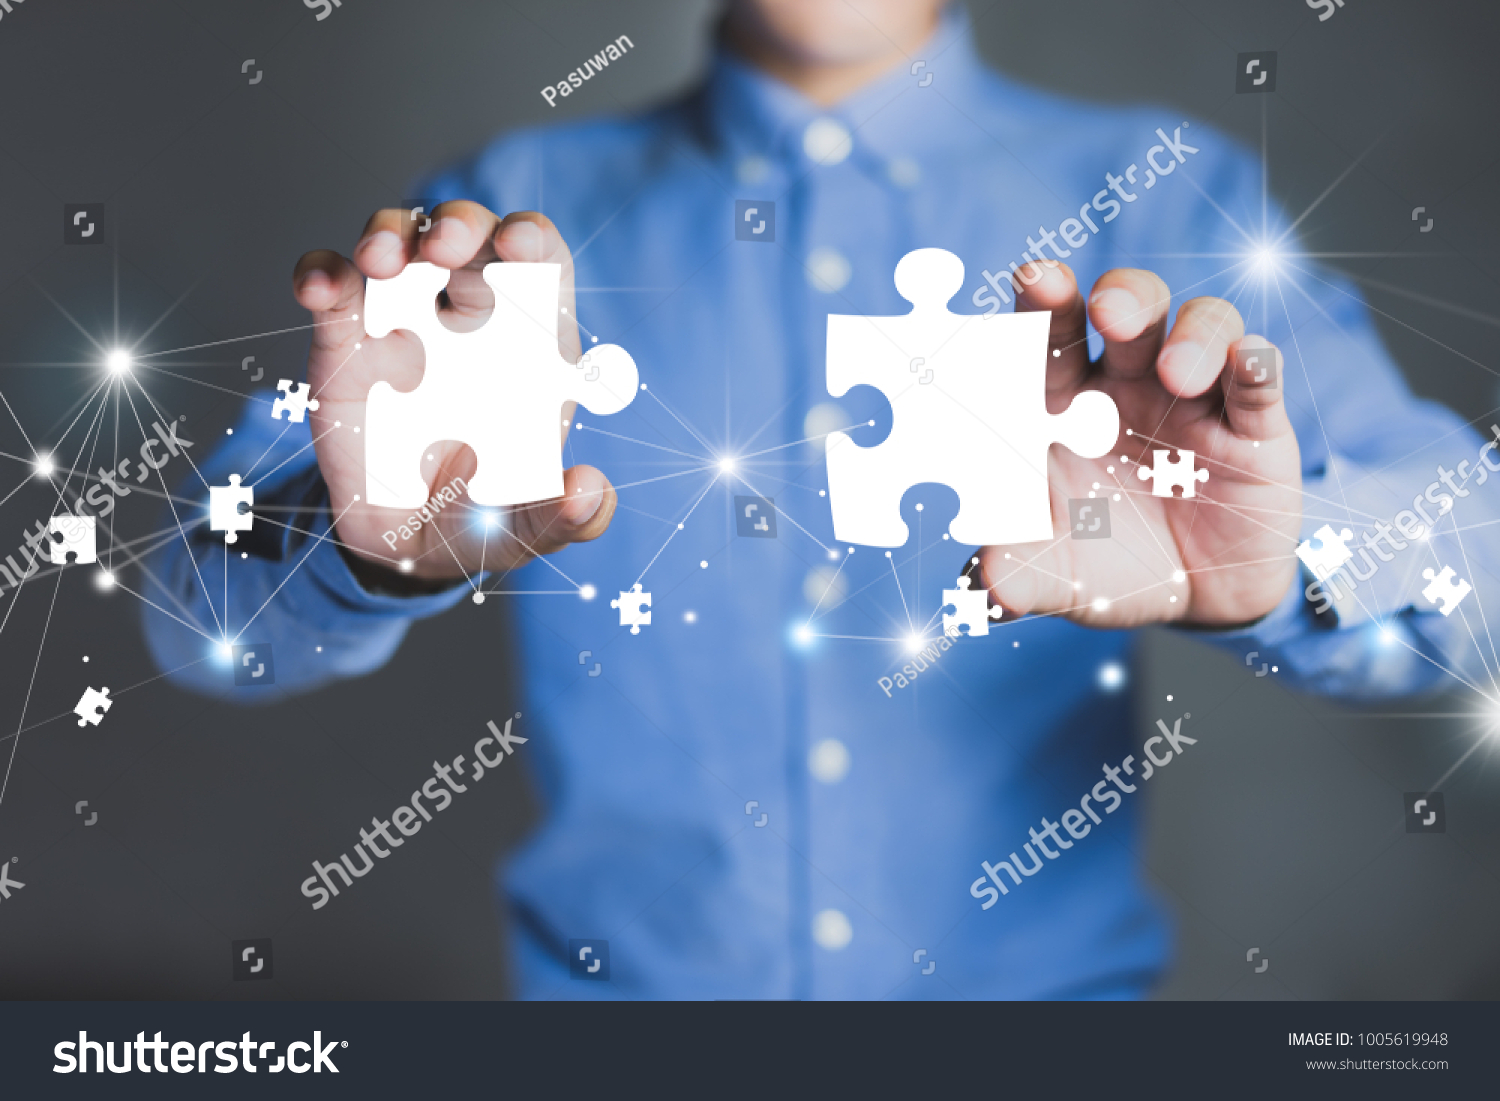 Businessman hands connecting puzzle pieces representing the merging of two companies or joint venture, partnership, Mergers and acquisition concept. #1005619948